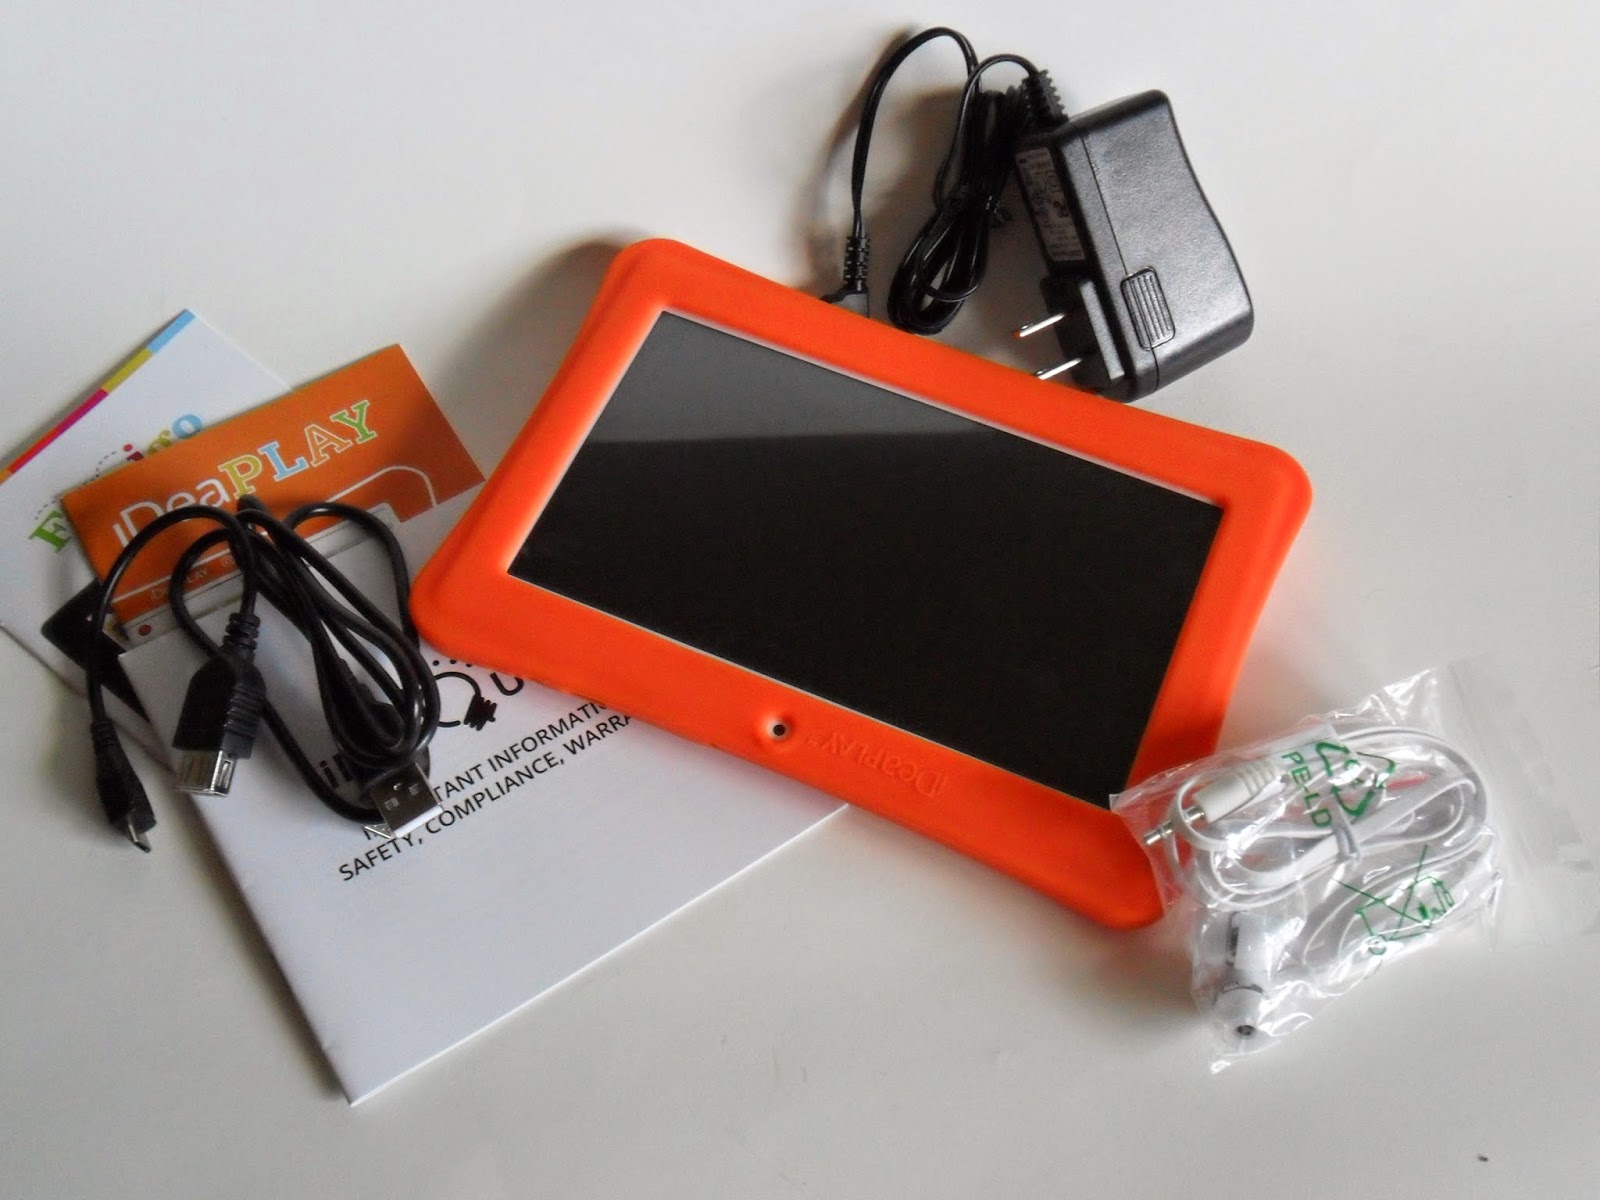 Some great iDeaPlay Tablet. Review